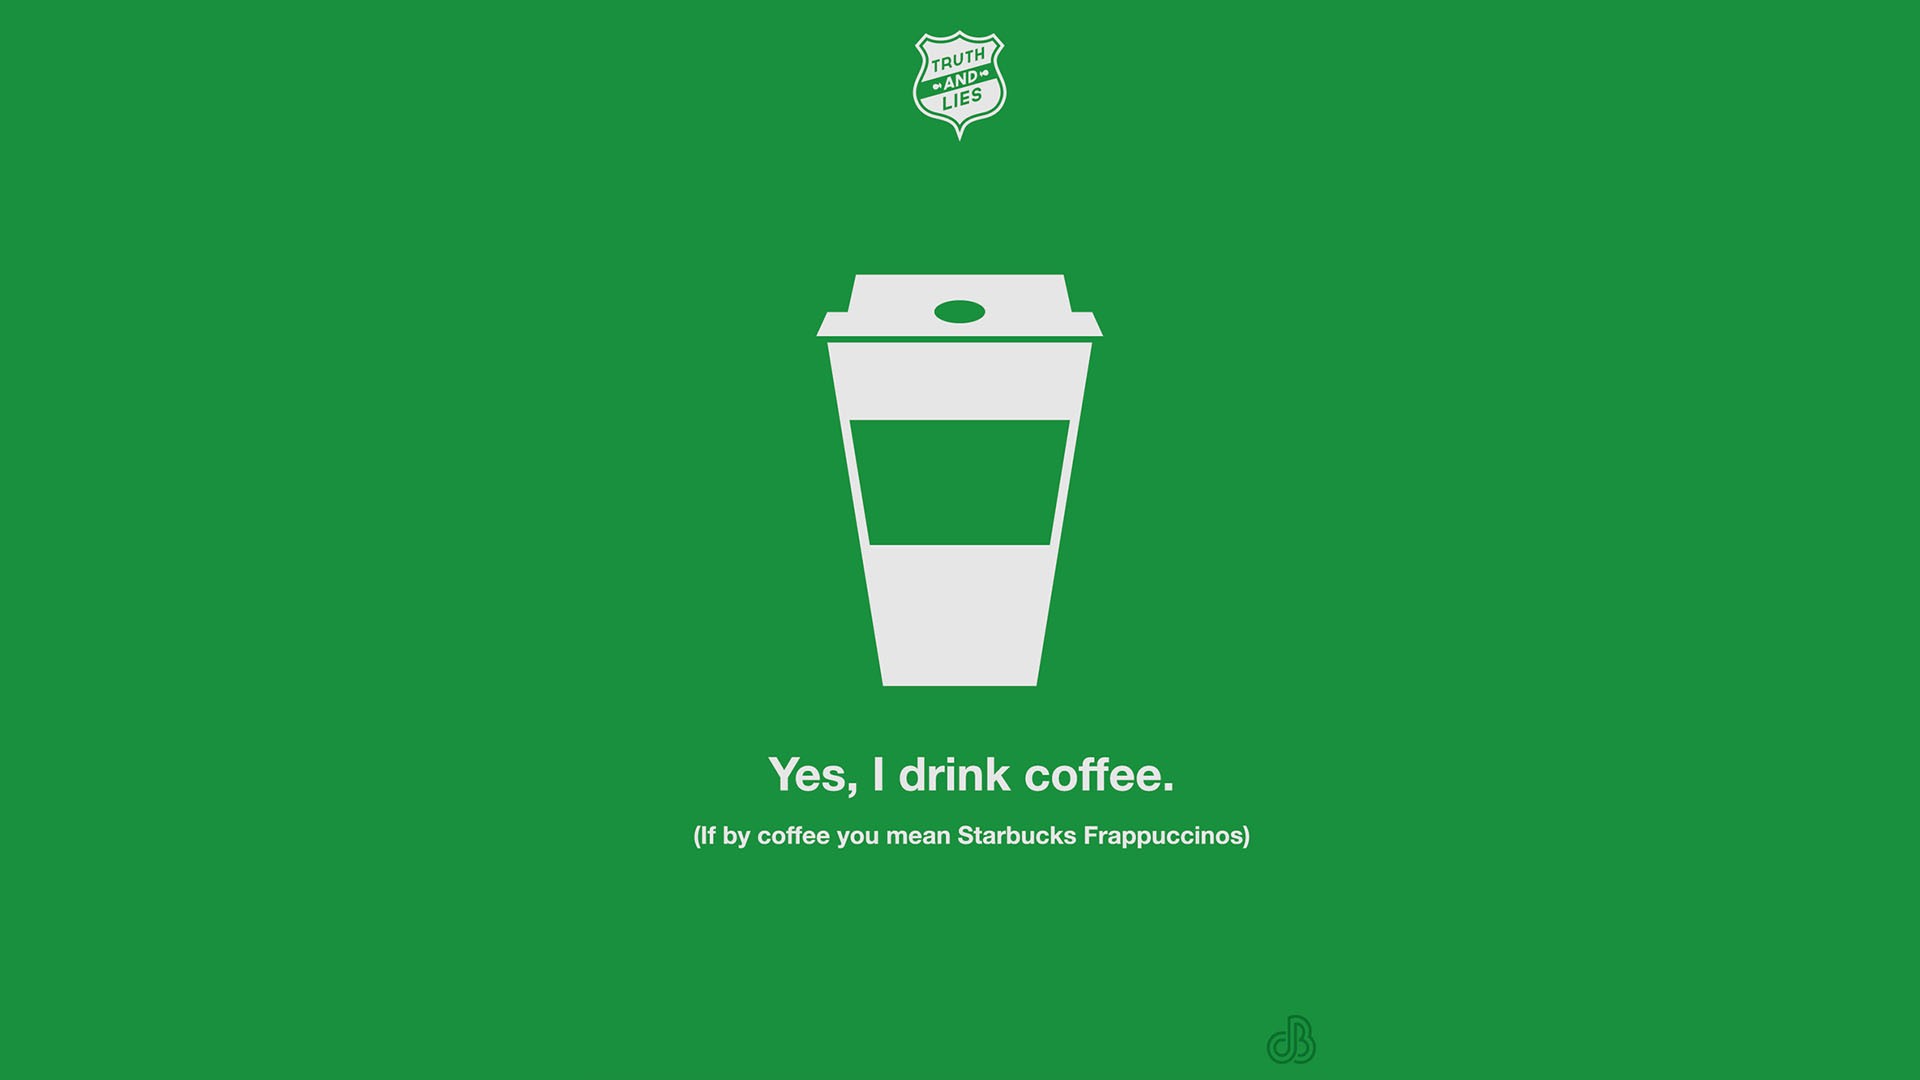 General 1920x1080 Justin Barber humor coffee minimalism simple background green background green typography